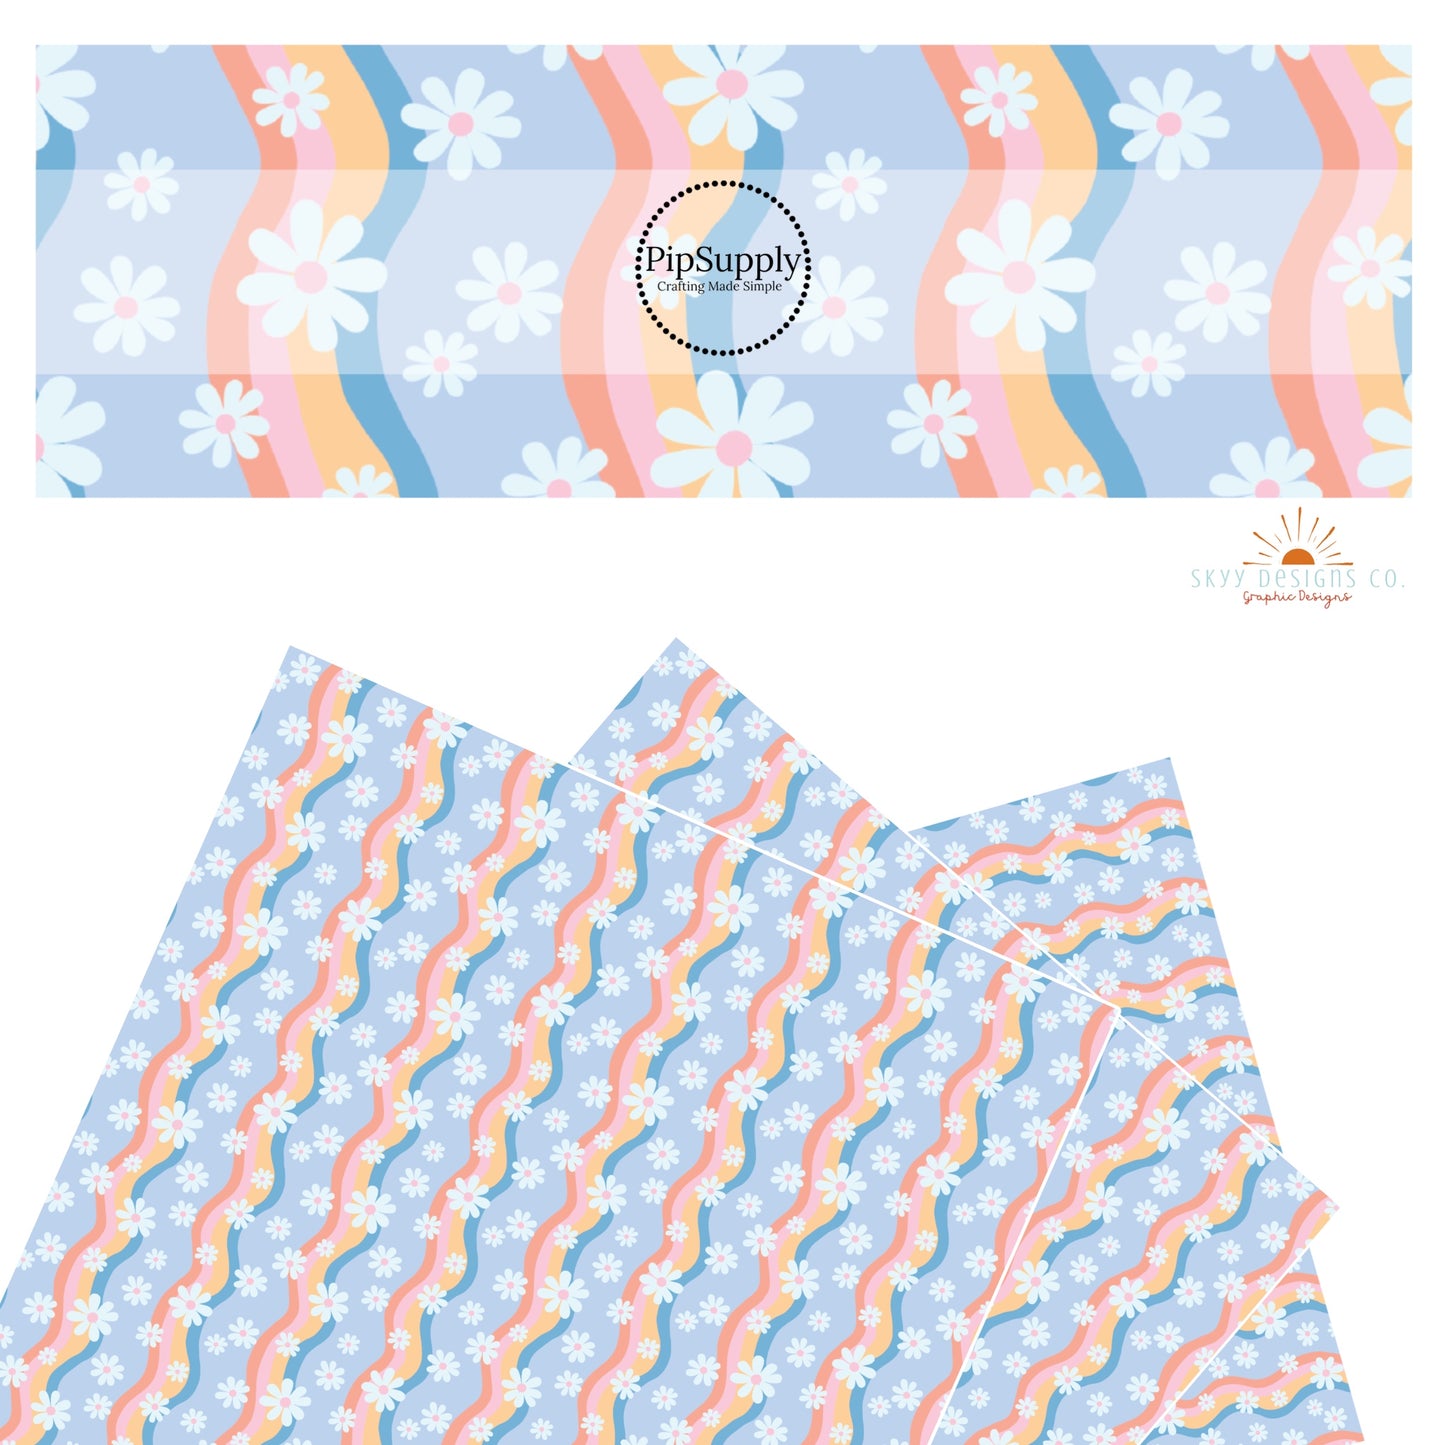 Wavy pastel rainbow stripes with white daisies with various sizes on periwinkle faux leather sheets. 